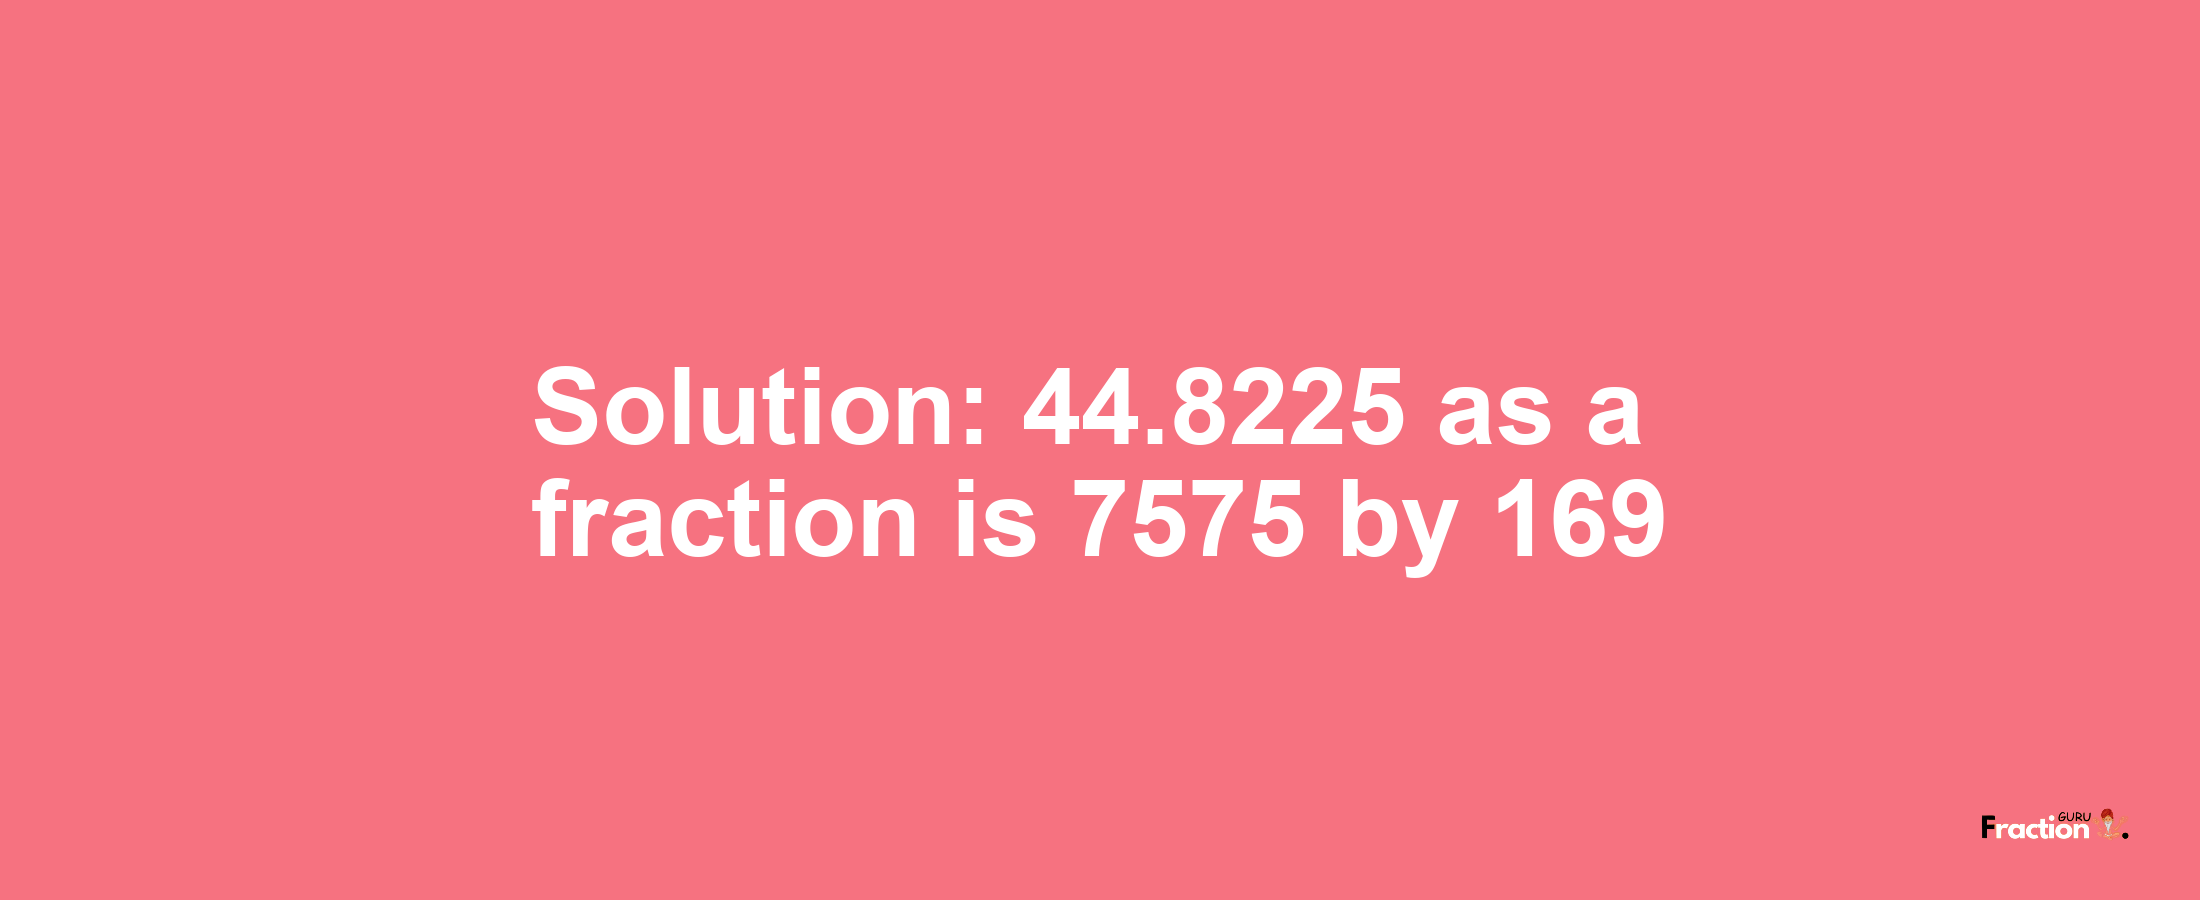 Solution:44.8225 as a fraction is 7575/169